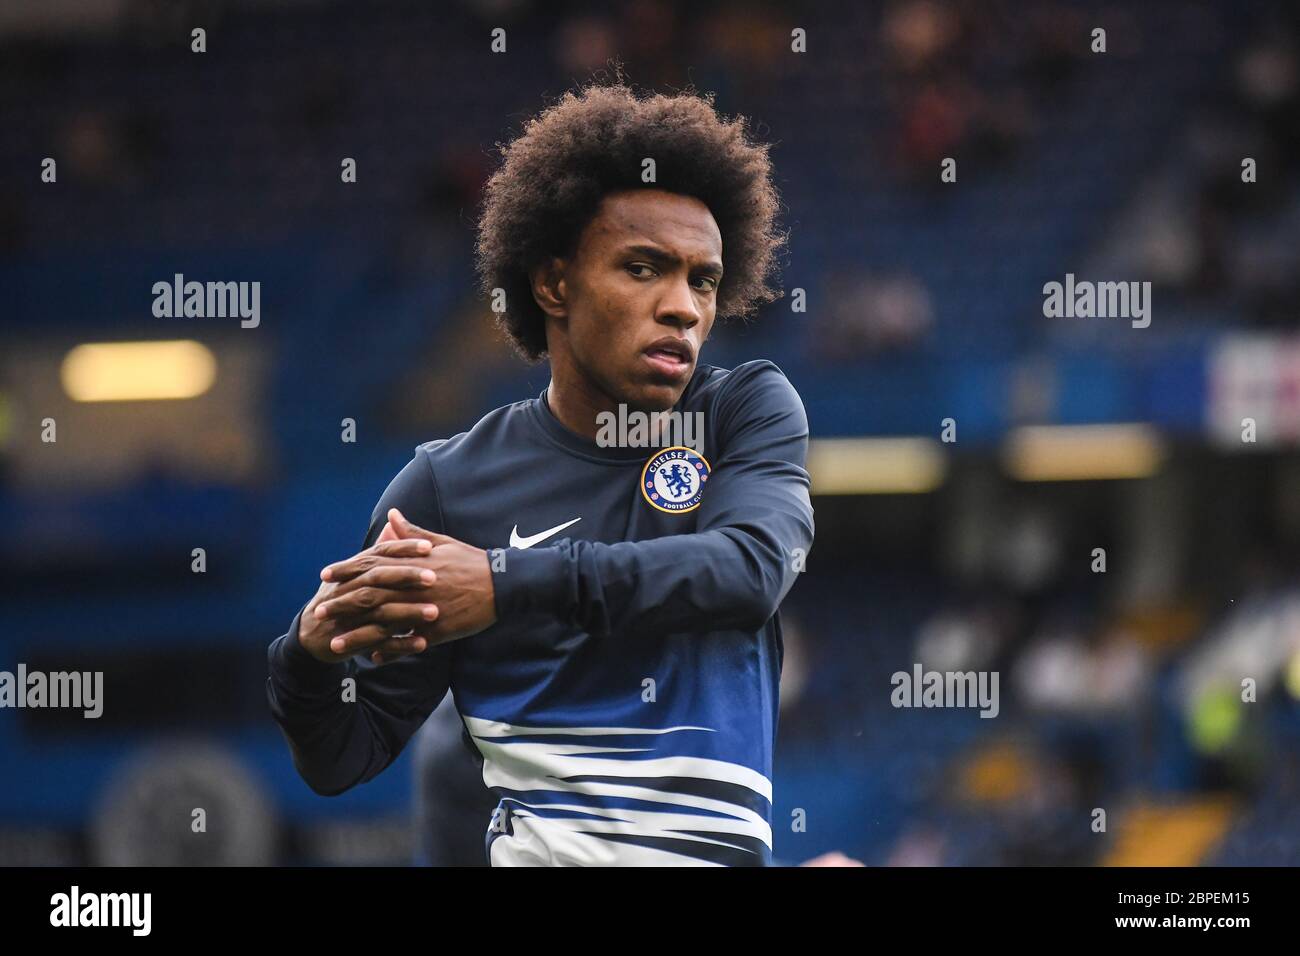 LONDON, ENGLAND - SEPTEMBER 22, 2019: Willian Borges da Silva of Chelsea pictured ahead of the 2019/20 Premier League game between Chelsea FC and Liverpool FC at Stamford Bridge. Stock Photo